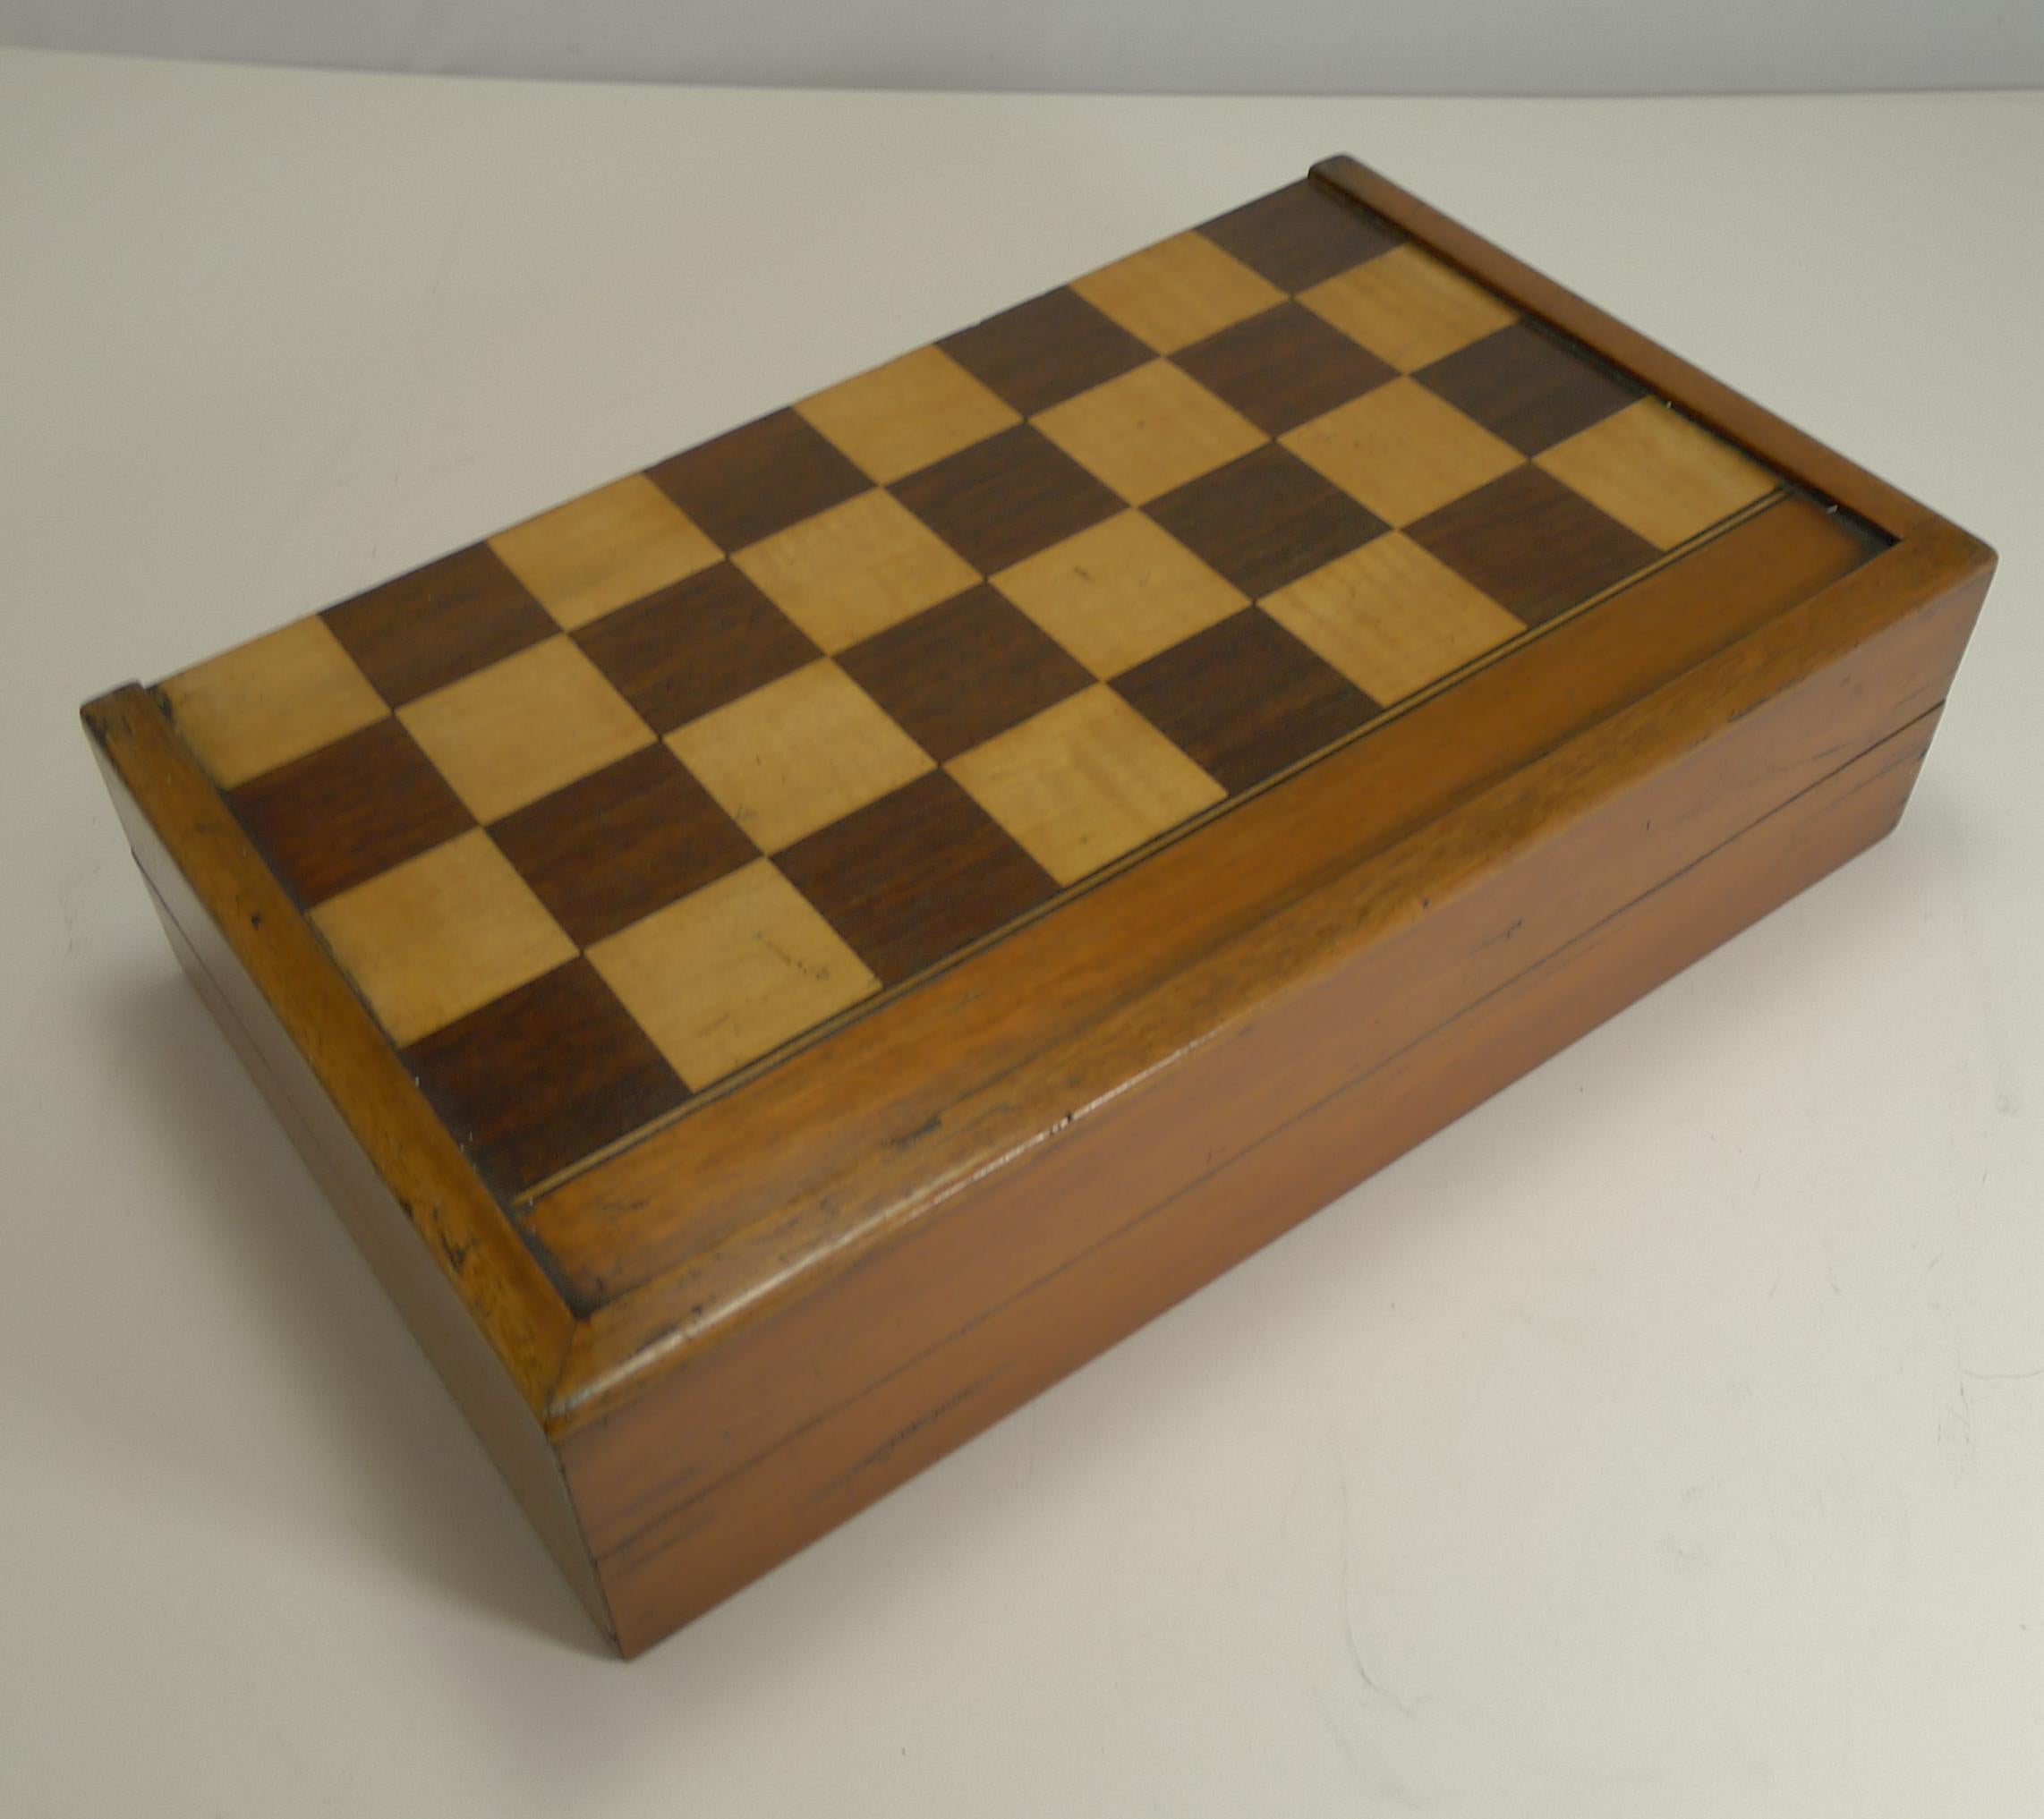 This antique English folding games board is made from mahogany and inlaid with mahogany and fruitwood tiles, each measuring 1 1/2